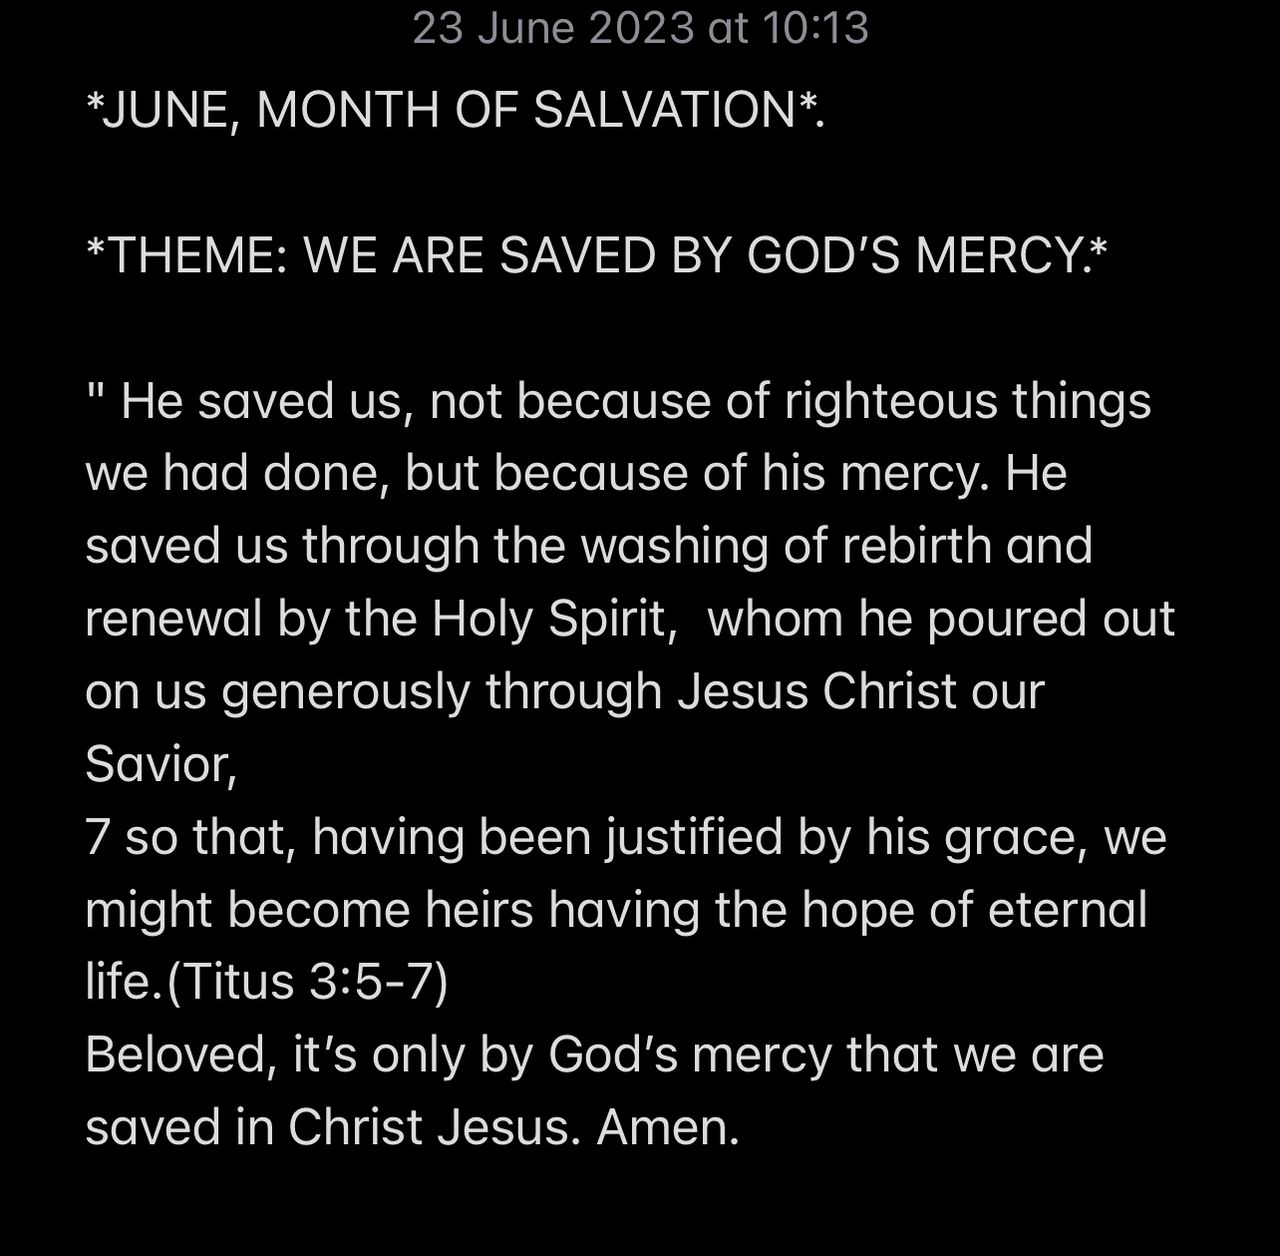 WE ARE SAVED THROUGH GOD'S MERCY